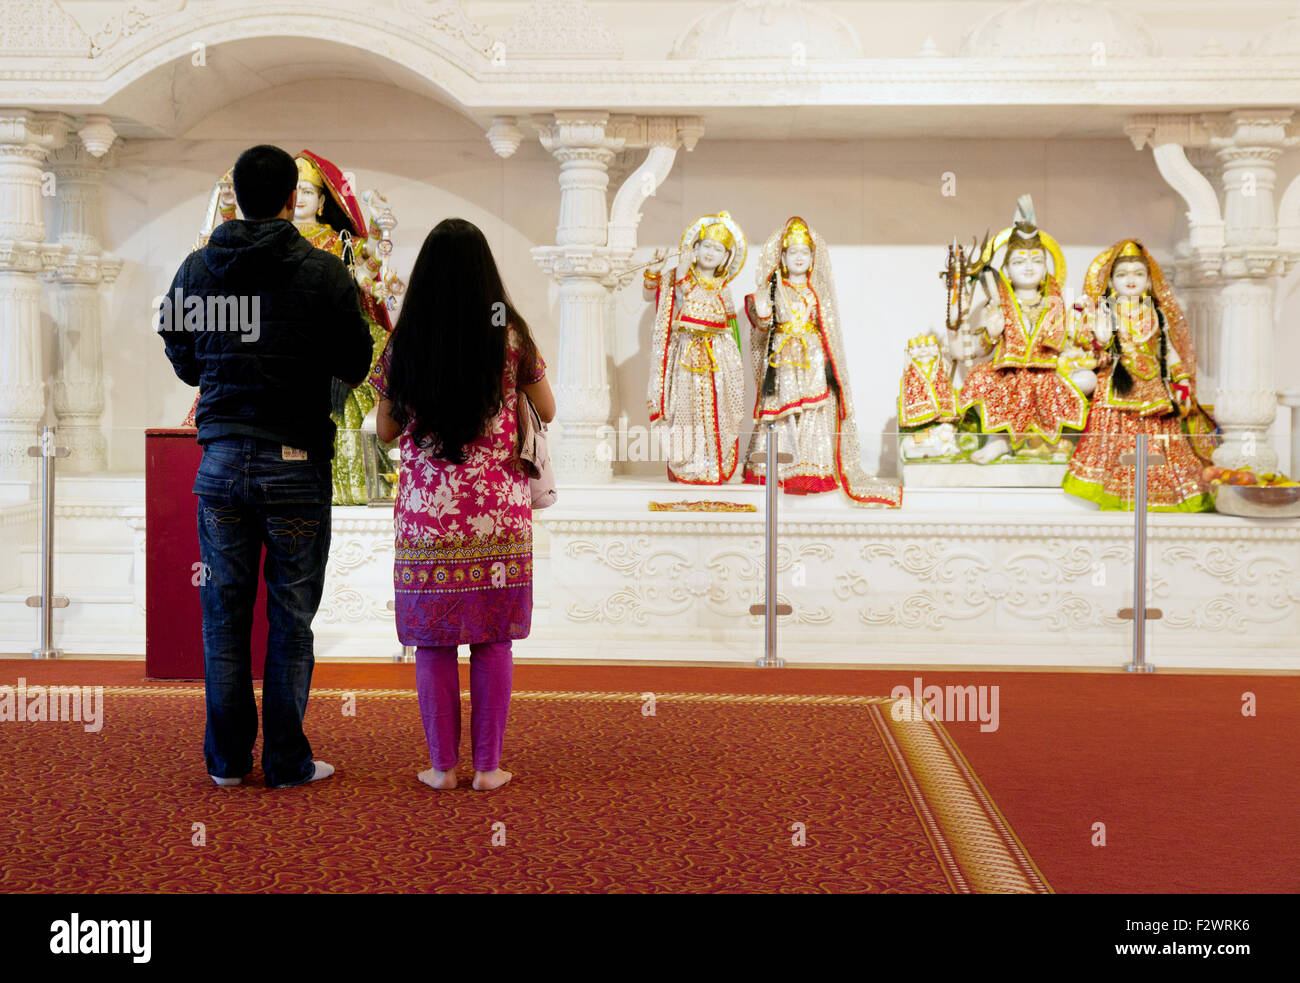 A Hindu couple looking at Hindu Gods, the Reading Hindu temple, Reading, Berkshire England UK, example of multicultural Britain Stock Photo